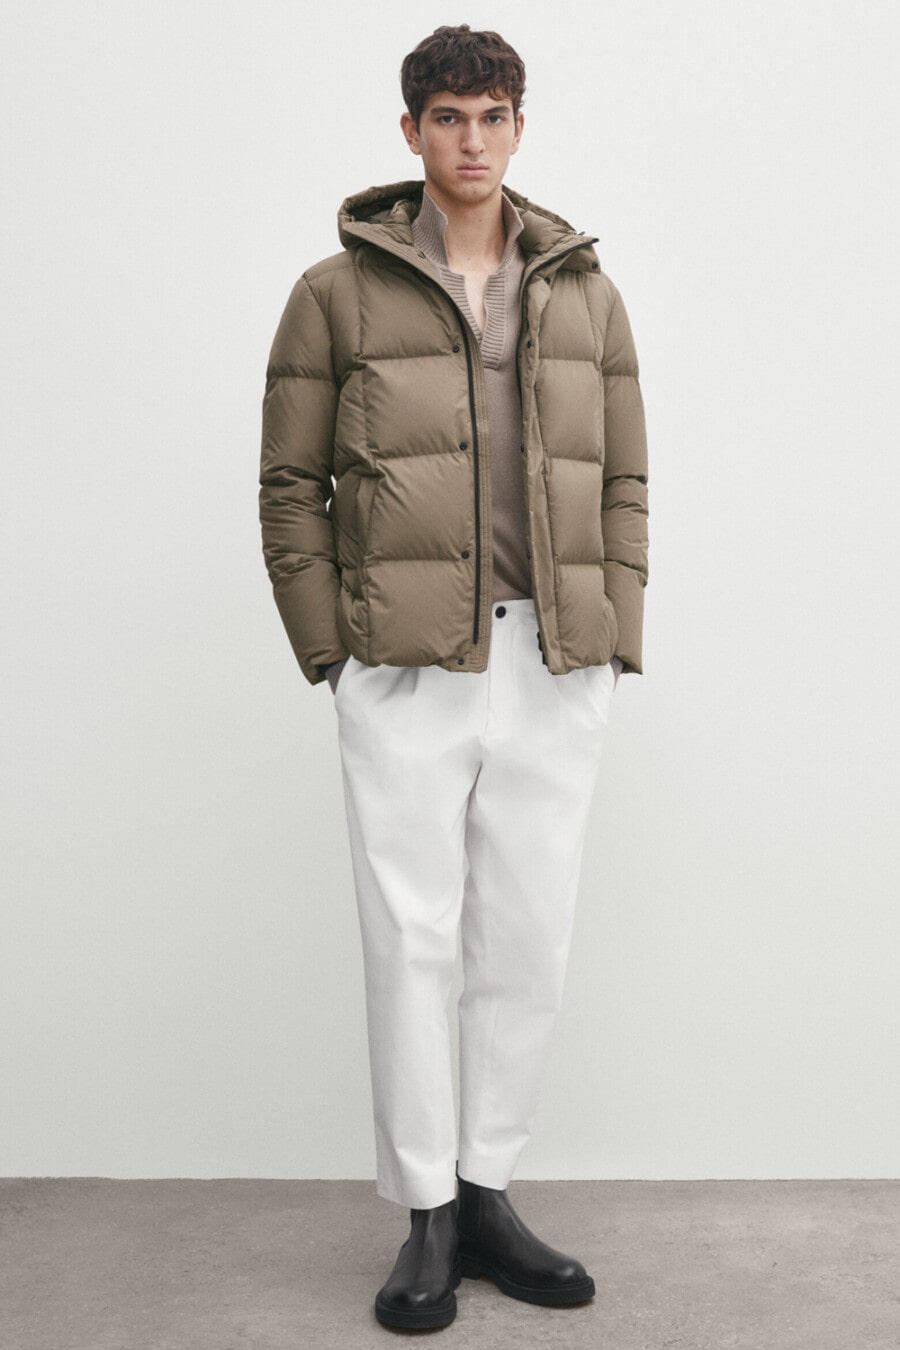 Men's white cropped pants, brown open collar knitted polo shirt, brown puffer jacket and black leather Chelsea boots outfit